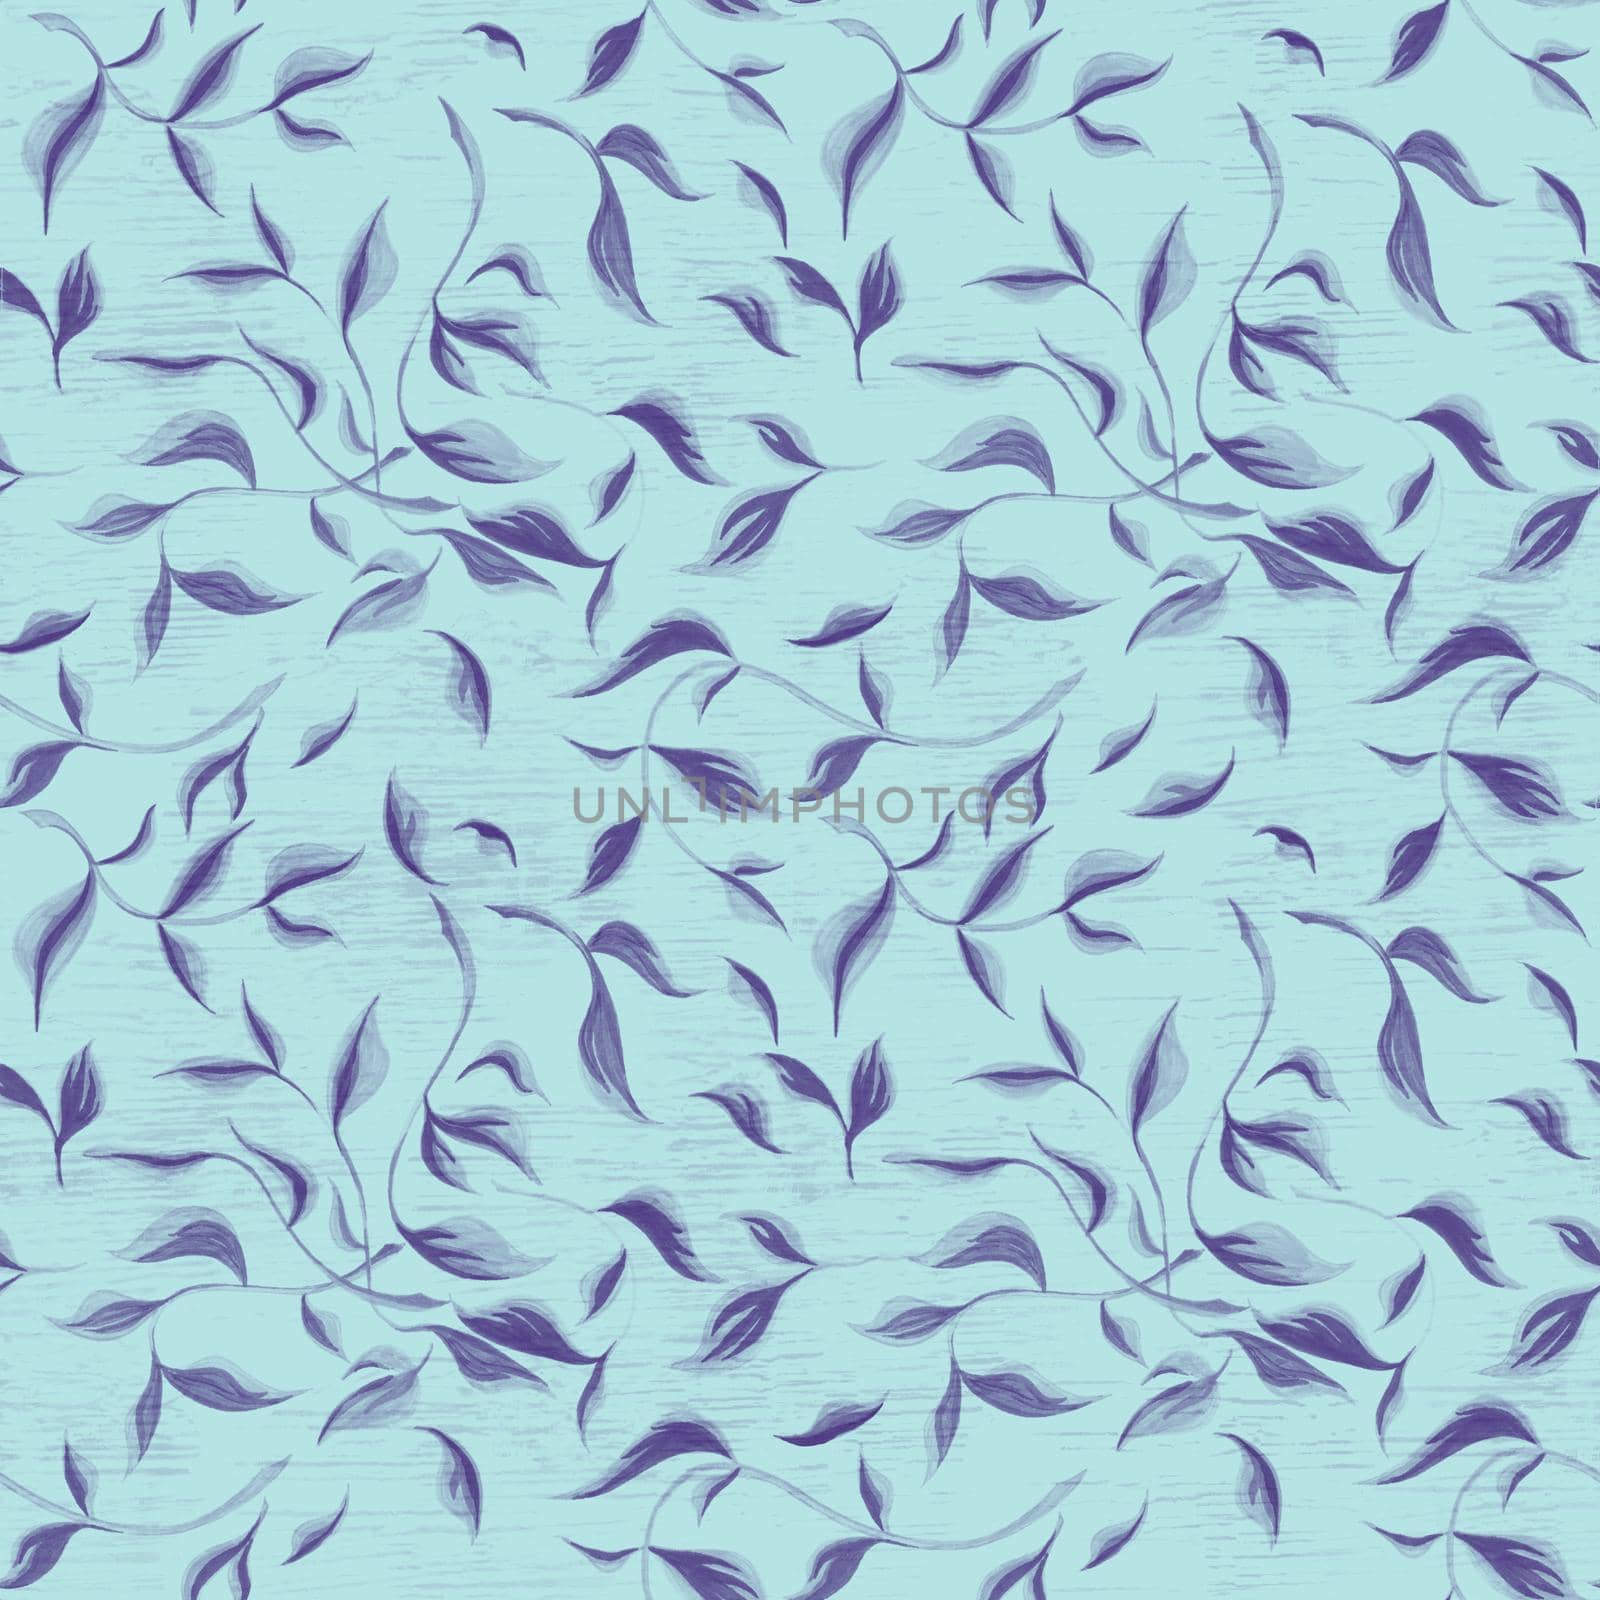 Seamless leaf pattern. Bluebackground made with feit-tip pens and marker. Trendy scandinavian design concept for fashion textile print. Nature illustration.